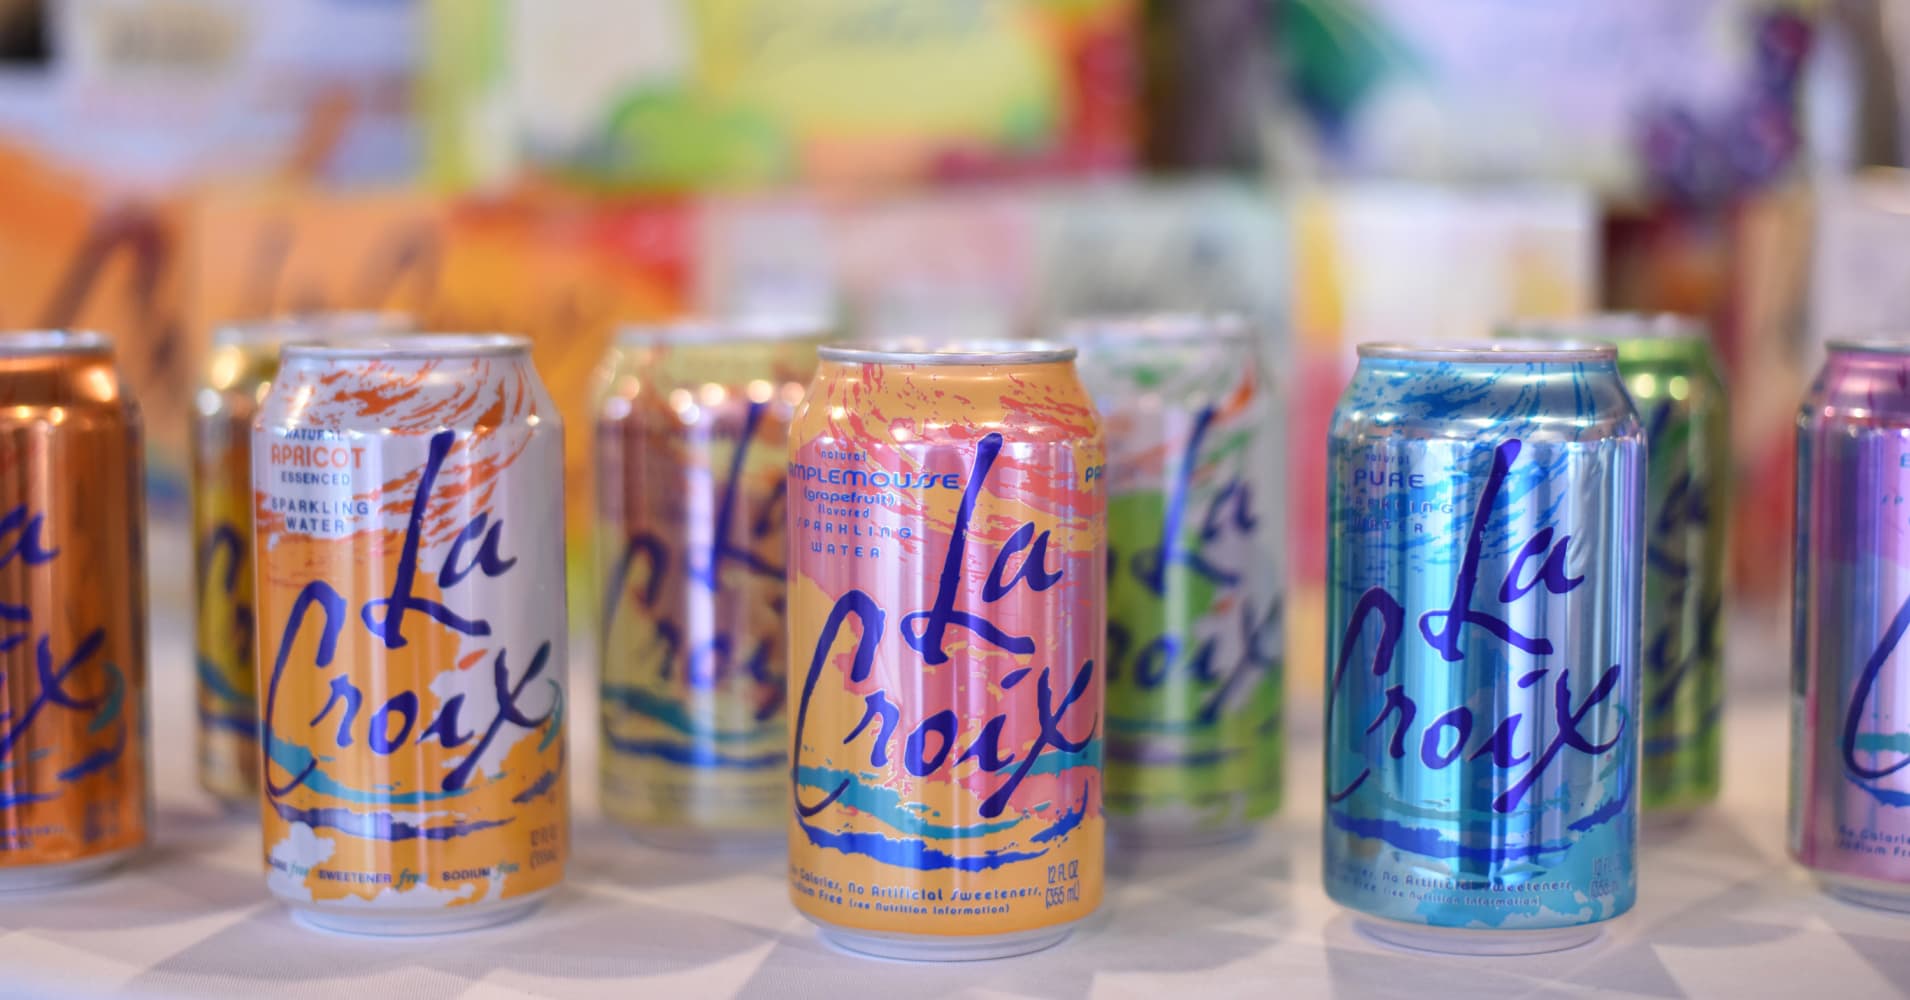 CEO of LaCroix parent reportedly accused of inappropriately touching two pilots